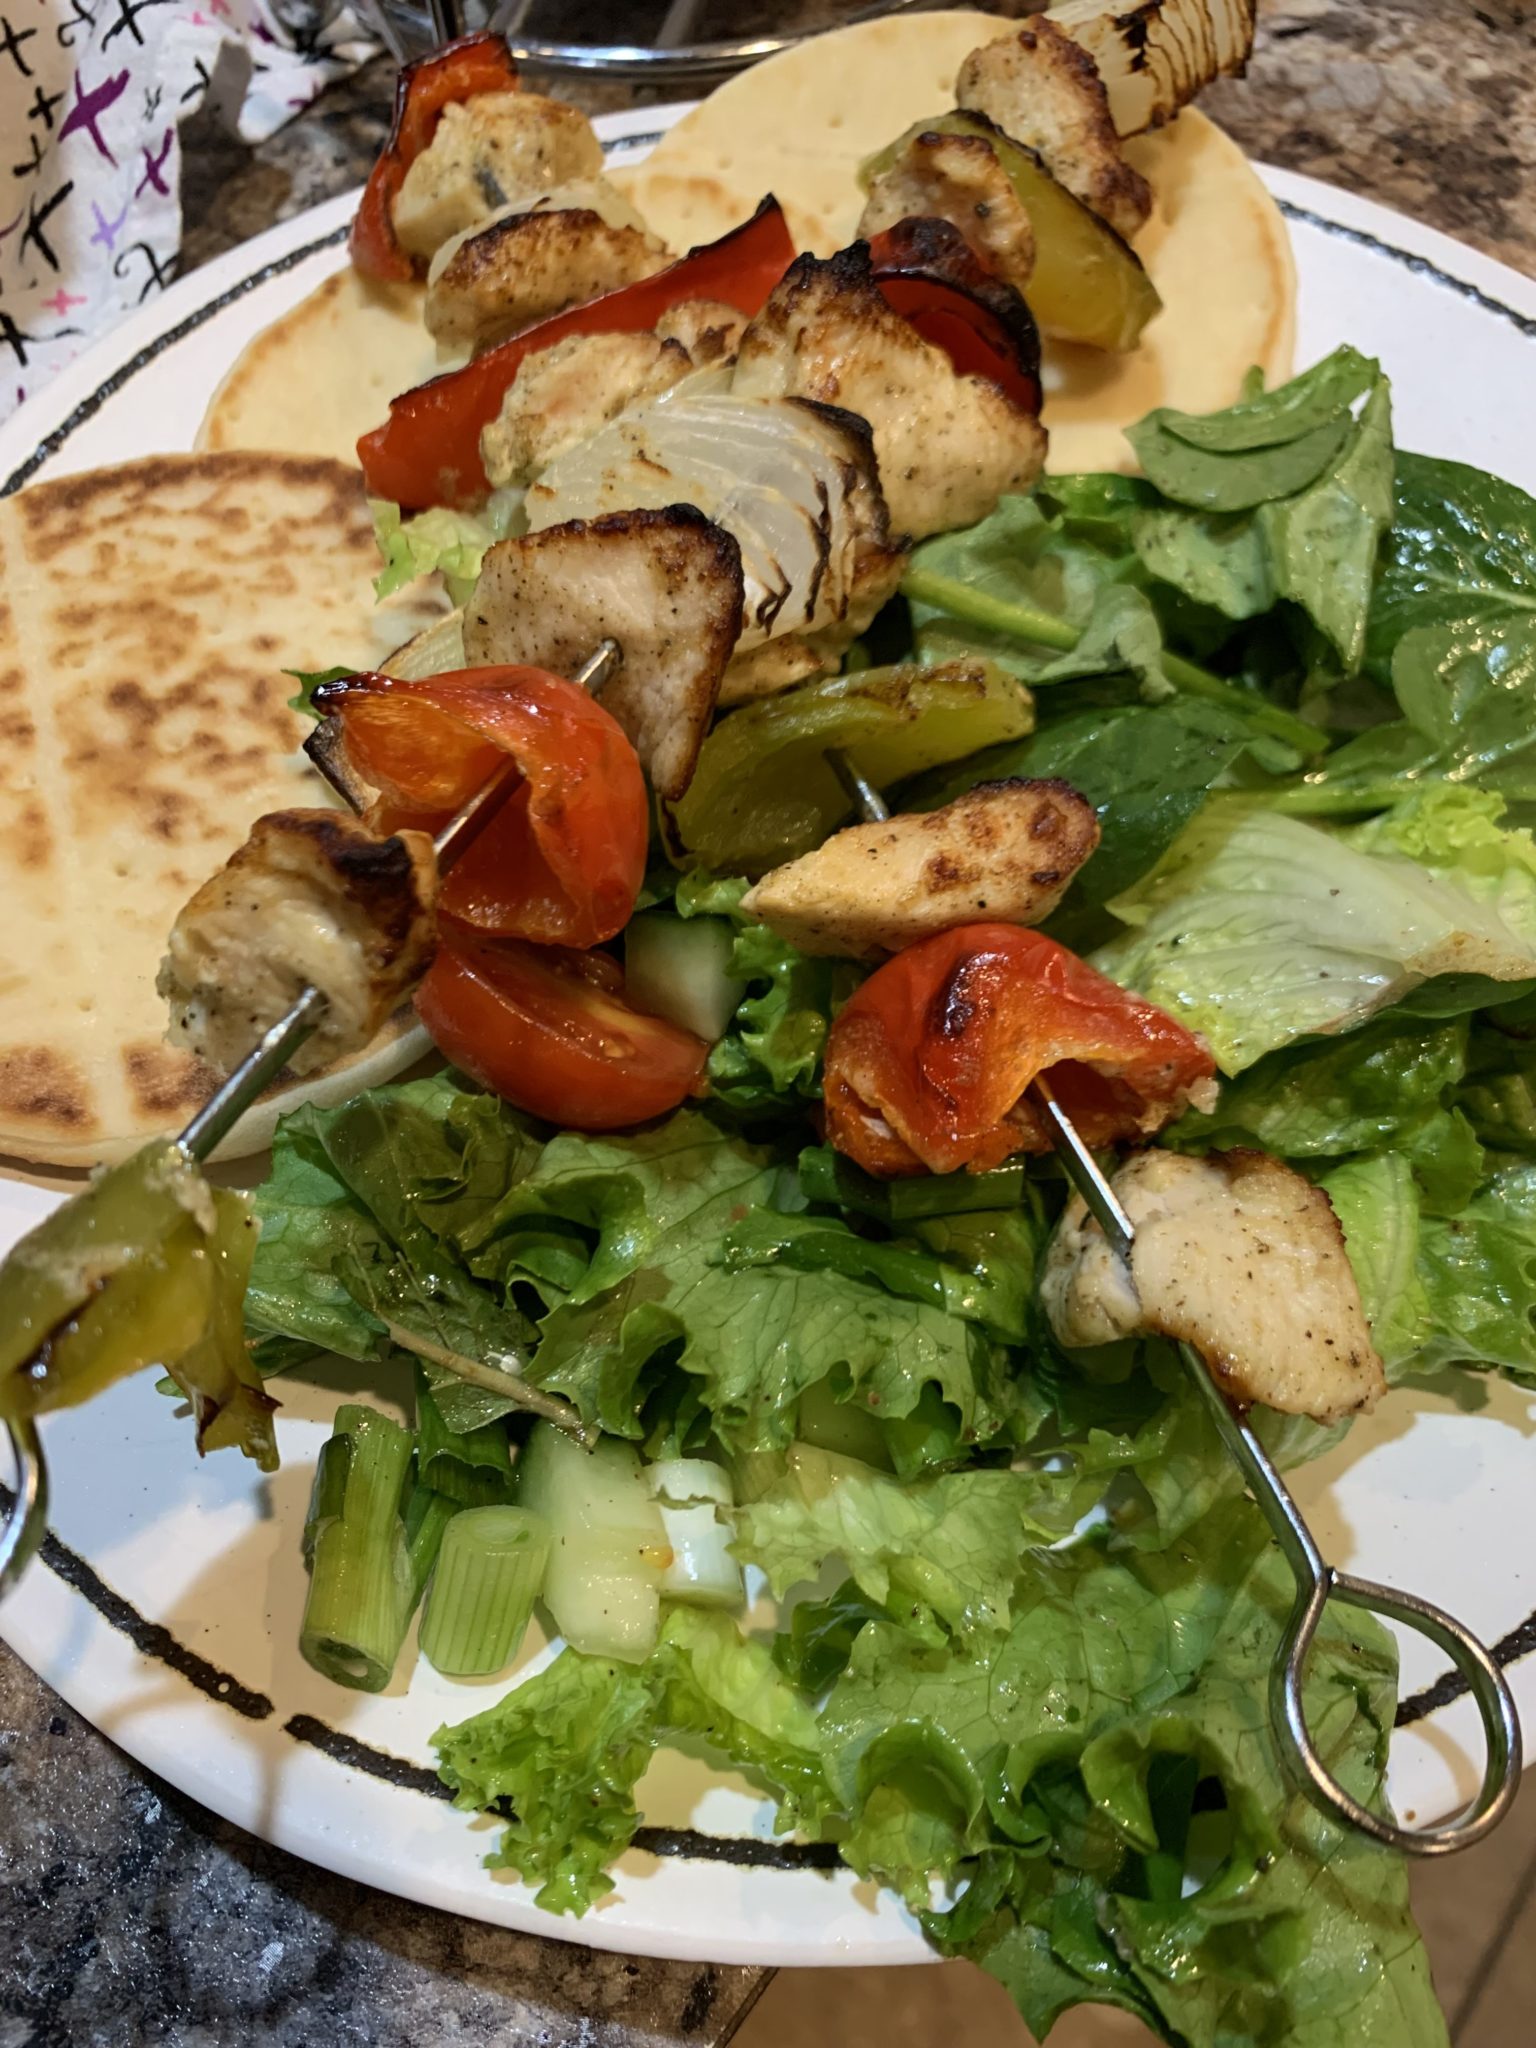 Picture of a plate with salad, kebabs and flat bread.